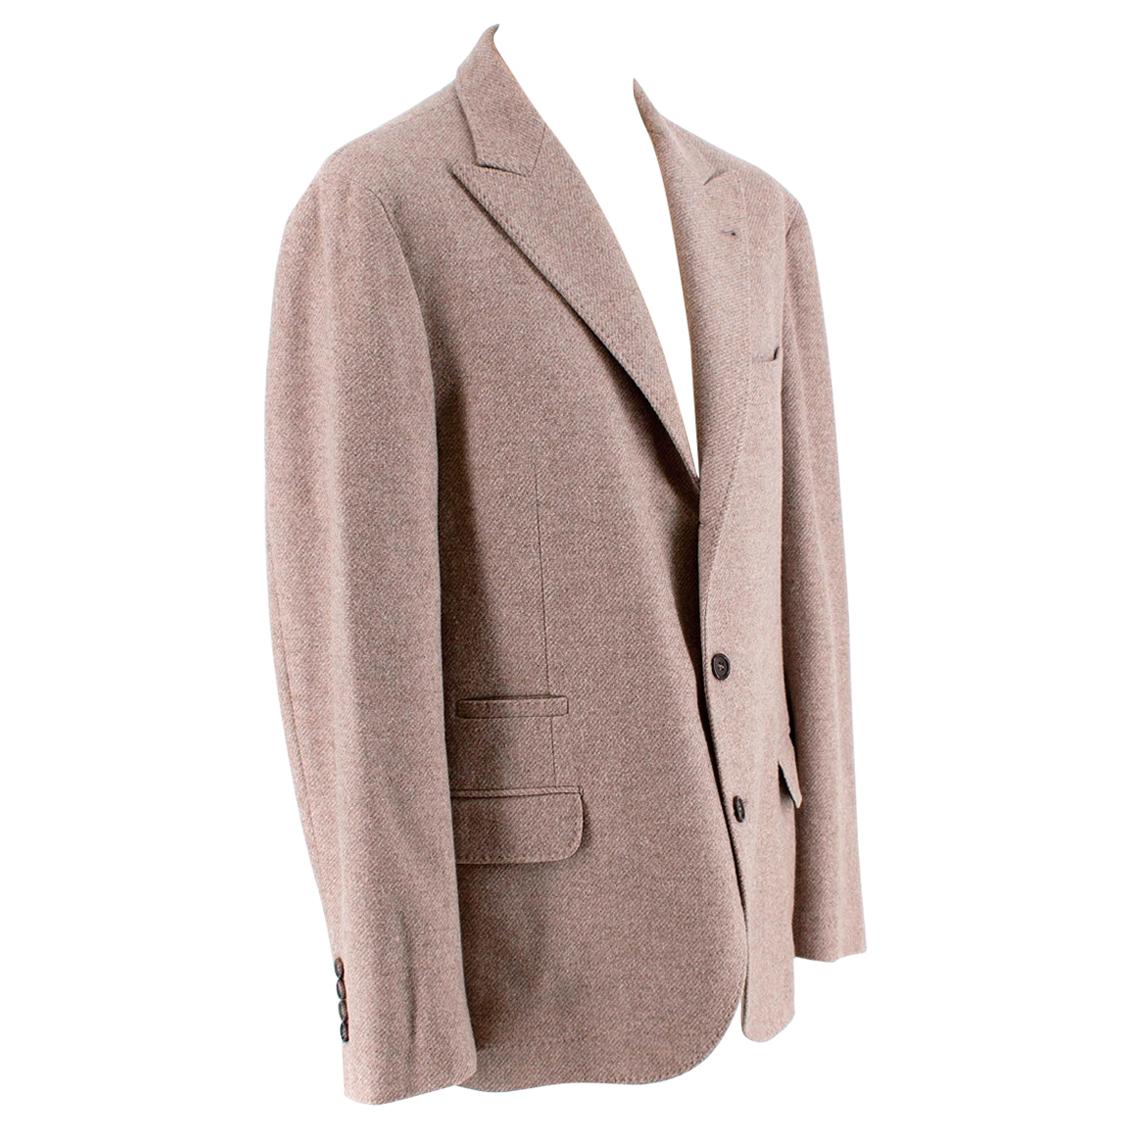 Brunello Cucinelli Cream Wool, Silk & Cashmere Tailored Jacket

-Luxurious soft texture 
-Classic elegant cut 
-Neutral timeless piece 
-4 pockets to the front 
-Button fastening to the front 
-Vents to the back 
-Buttoned cuffs 
-3 interior pockets